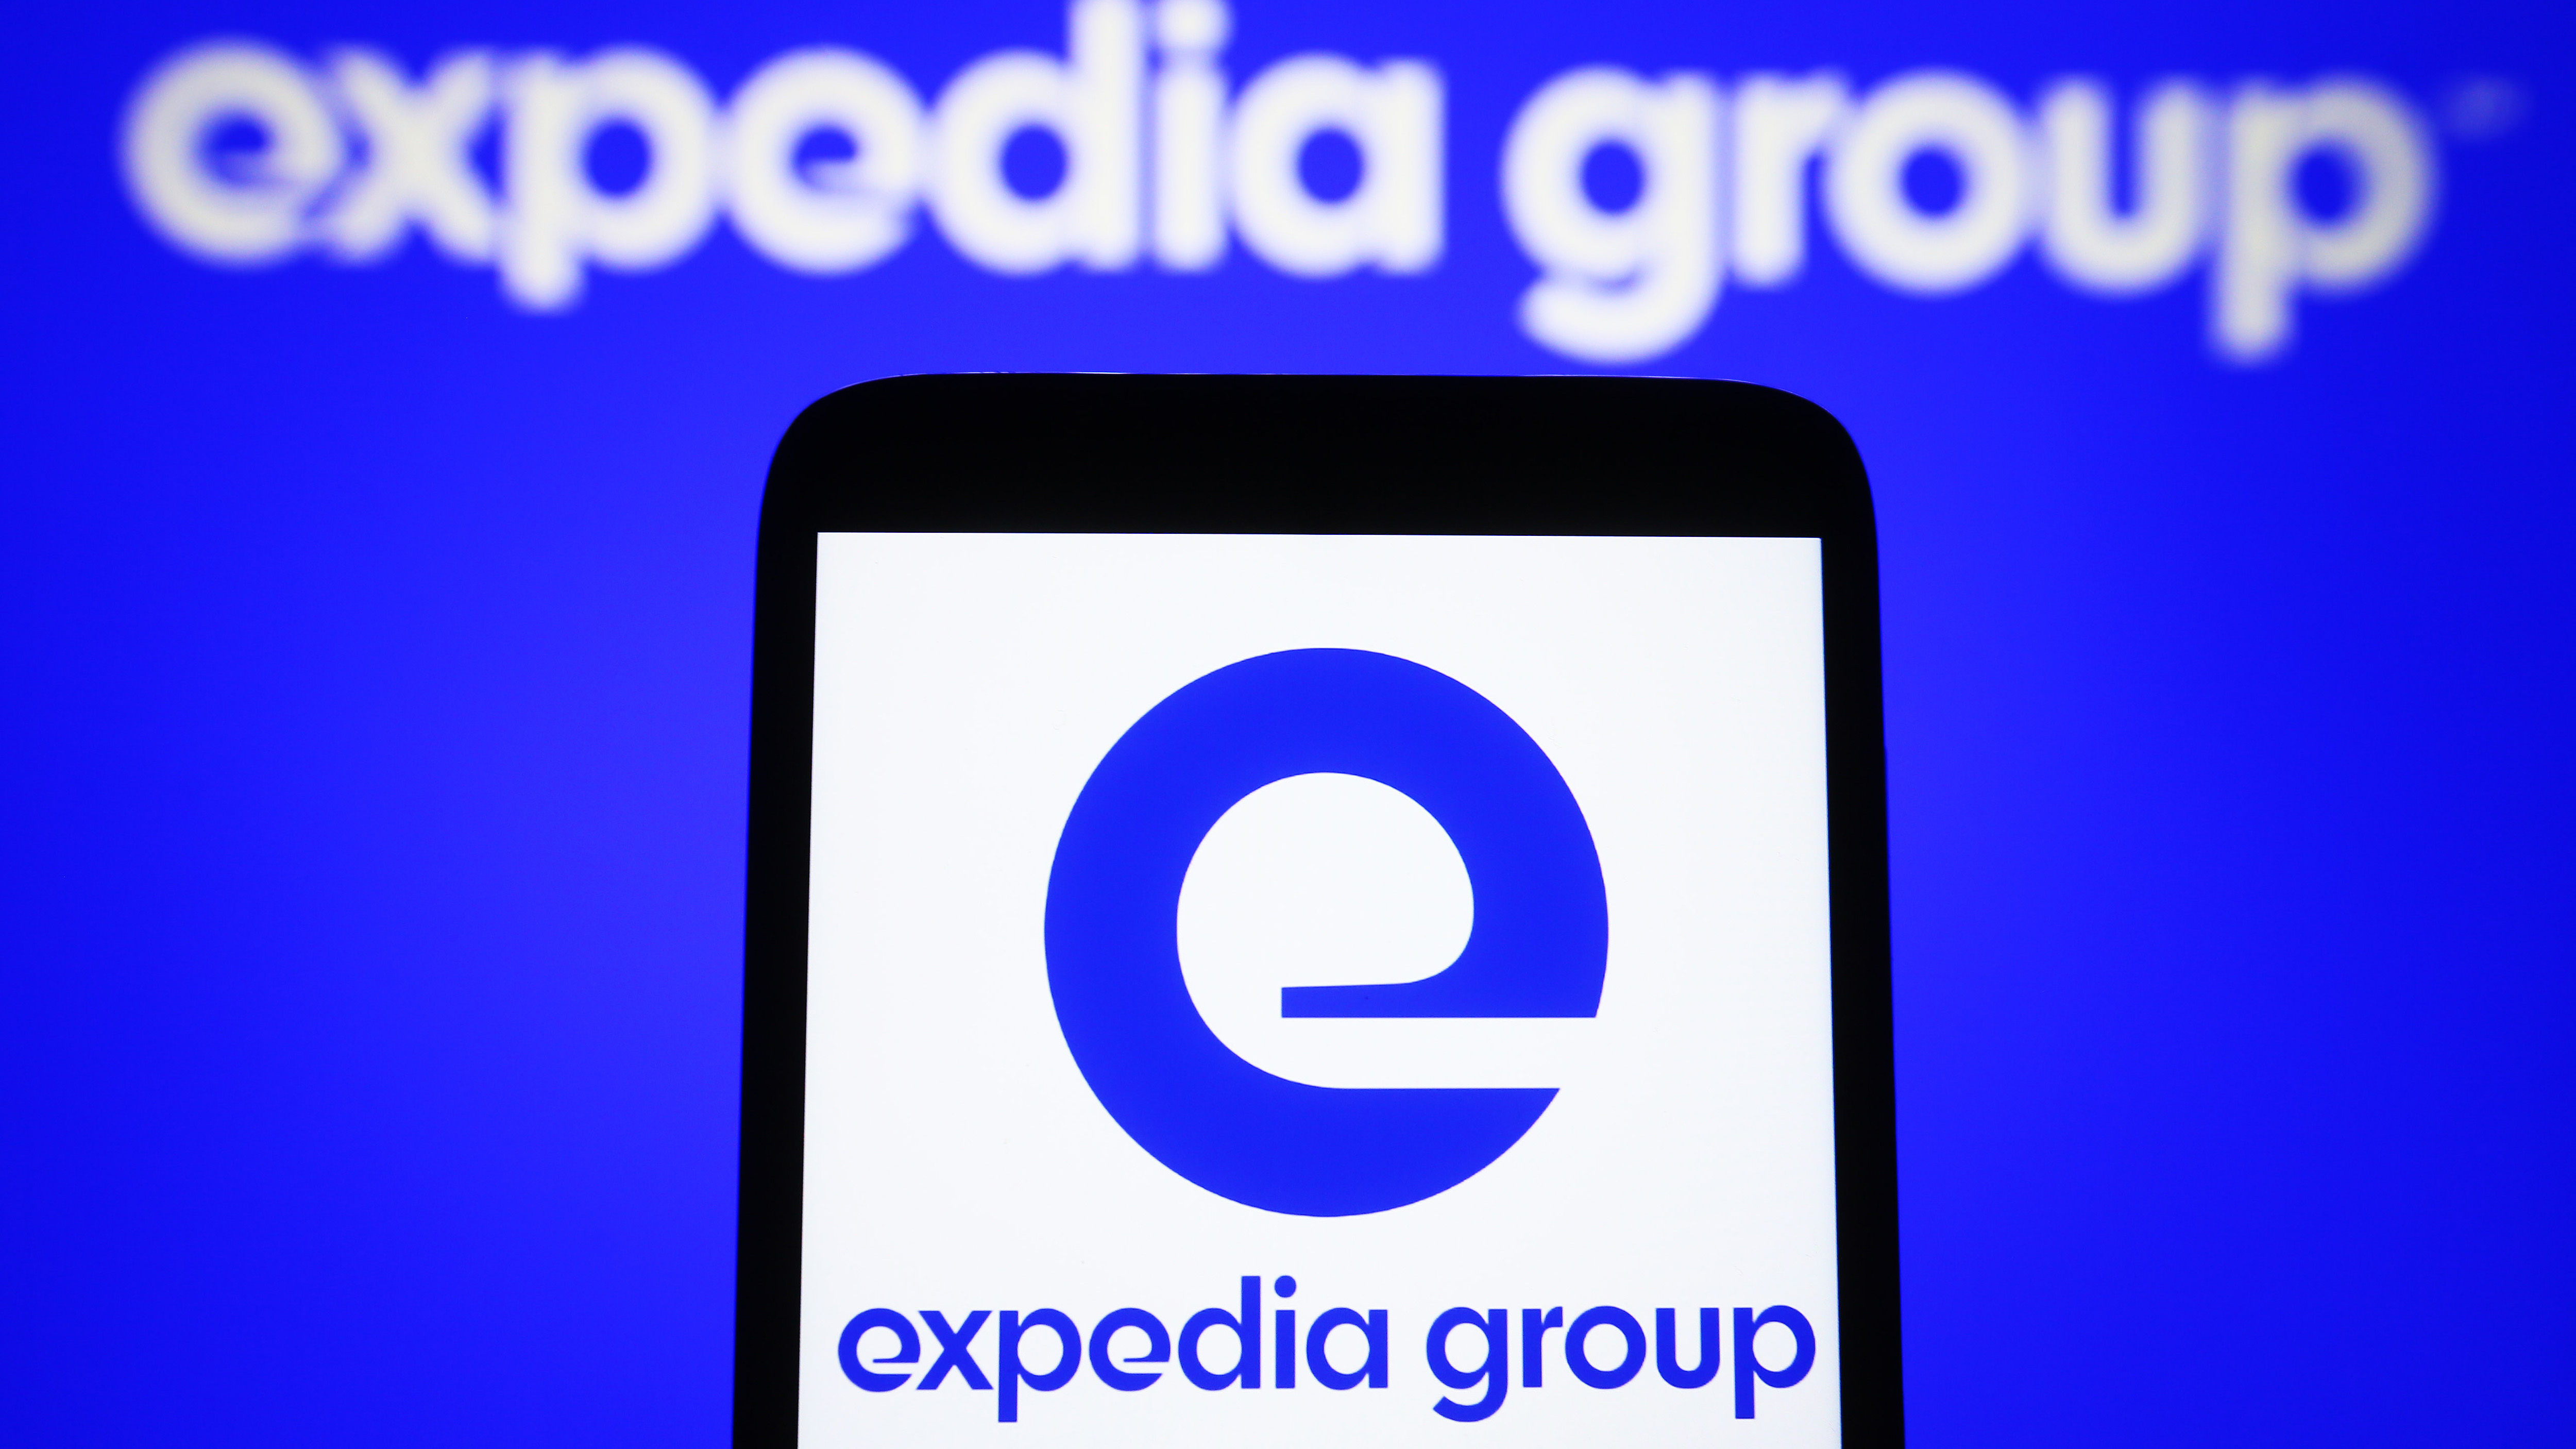 The Expedia Group Inc. logo shown on a smartphone in the foreground, and the words 